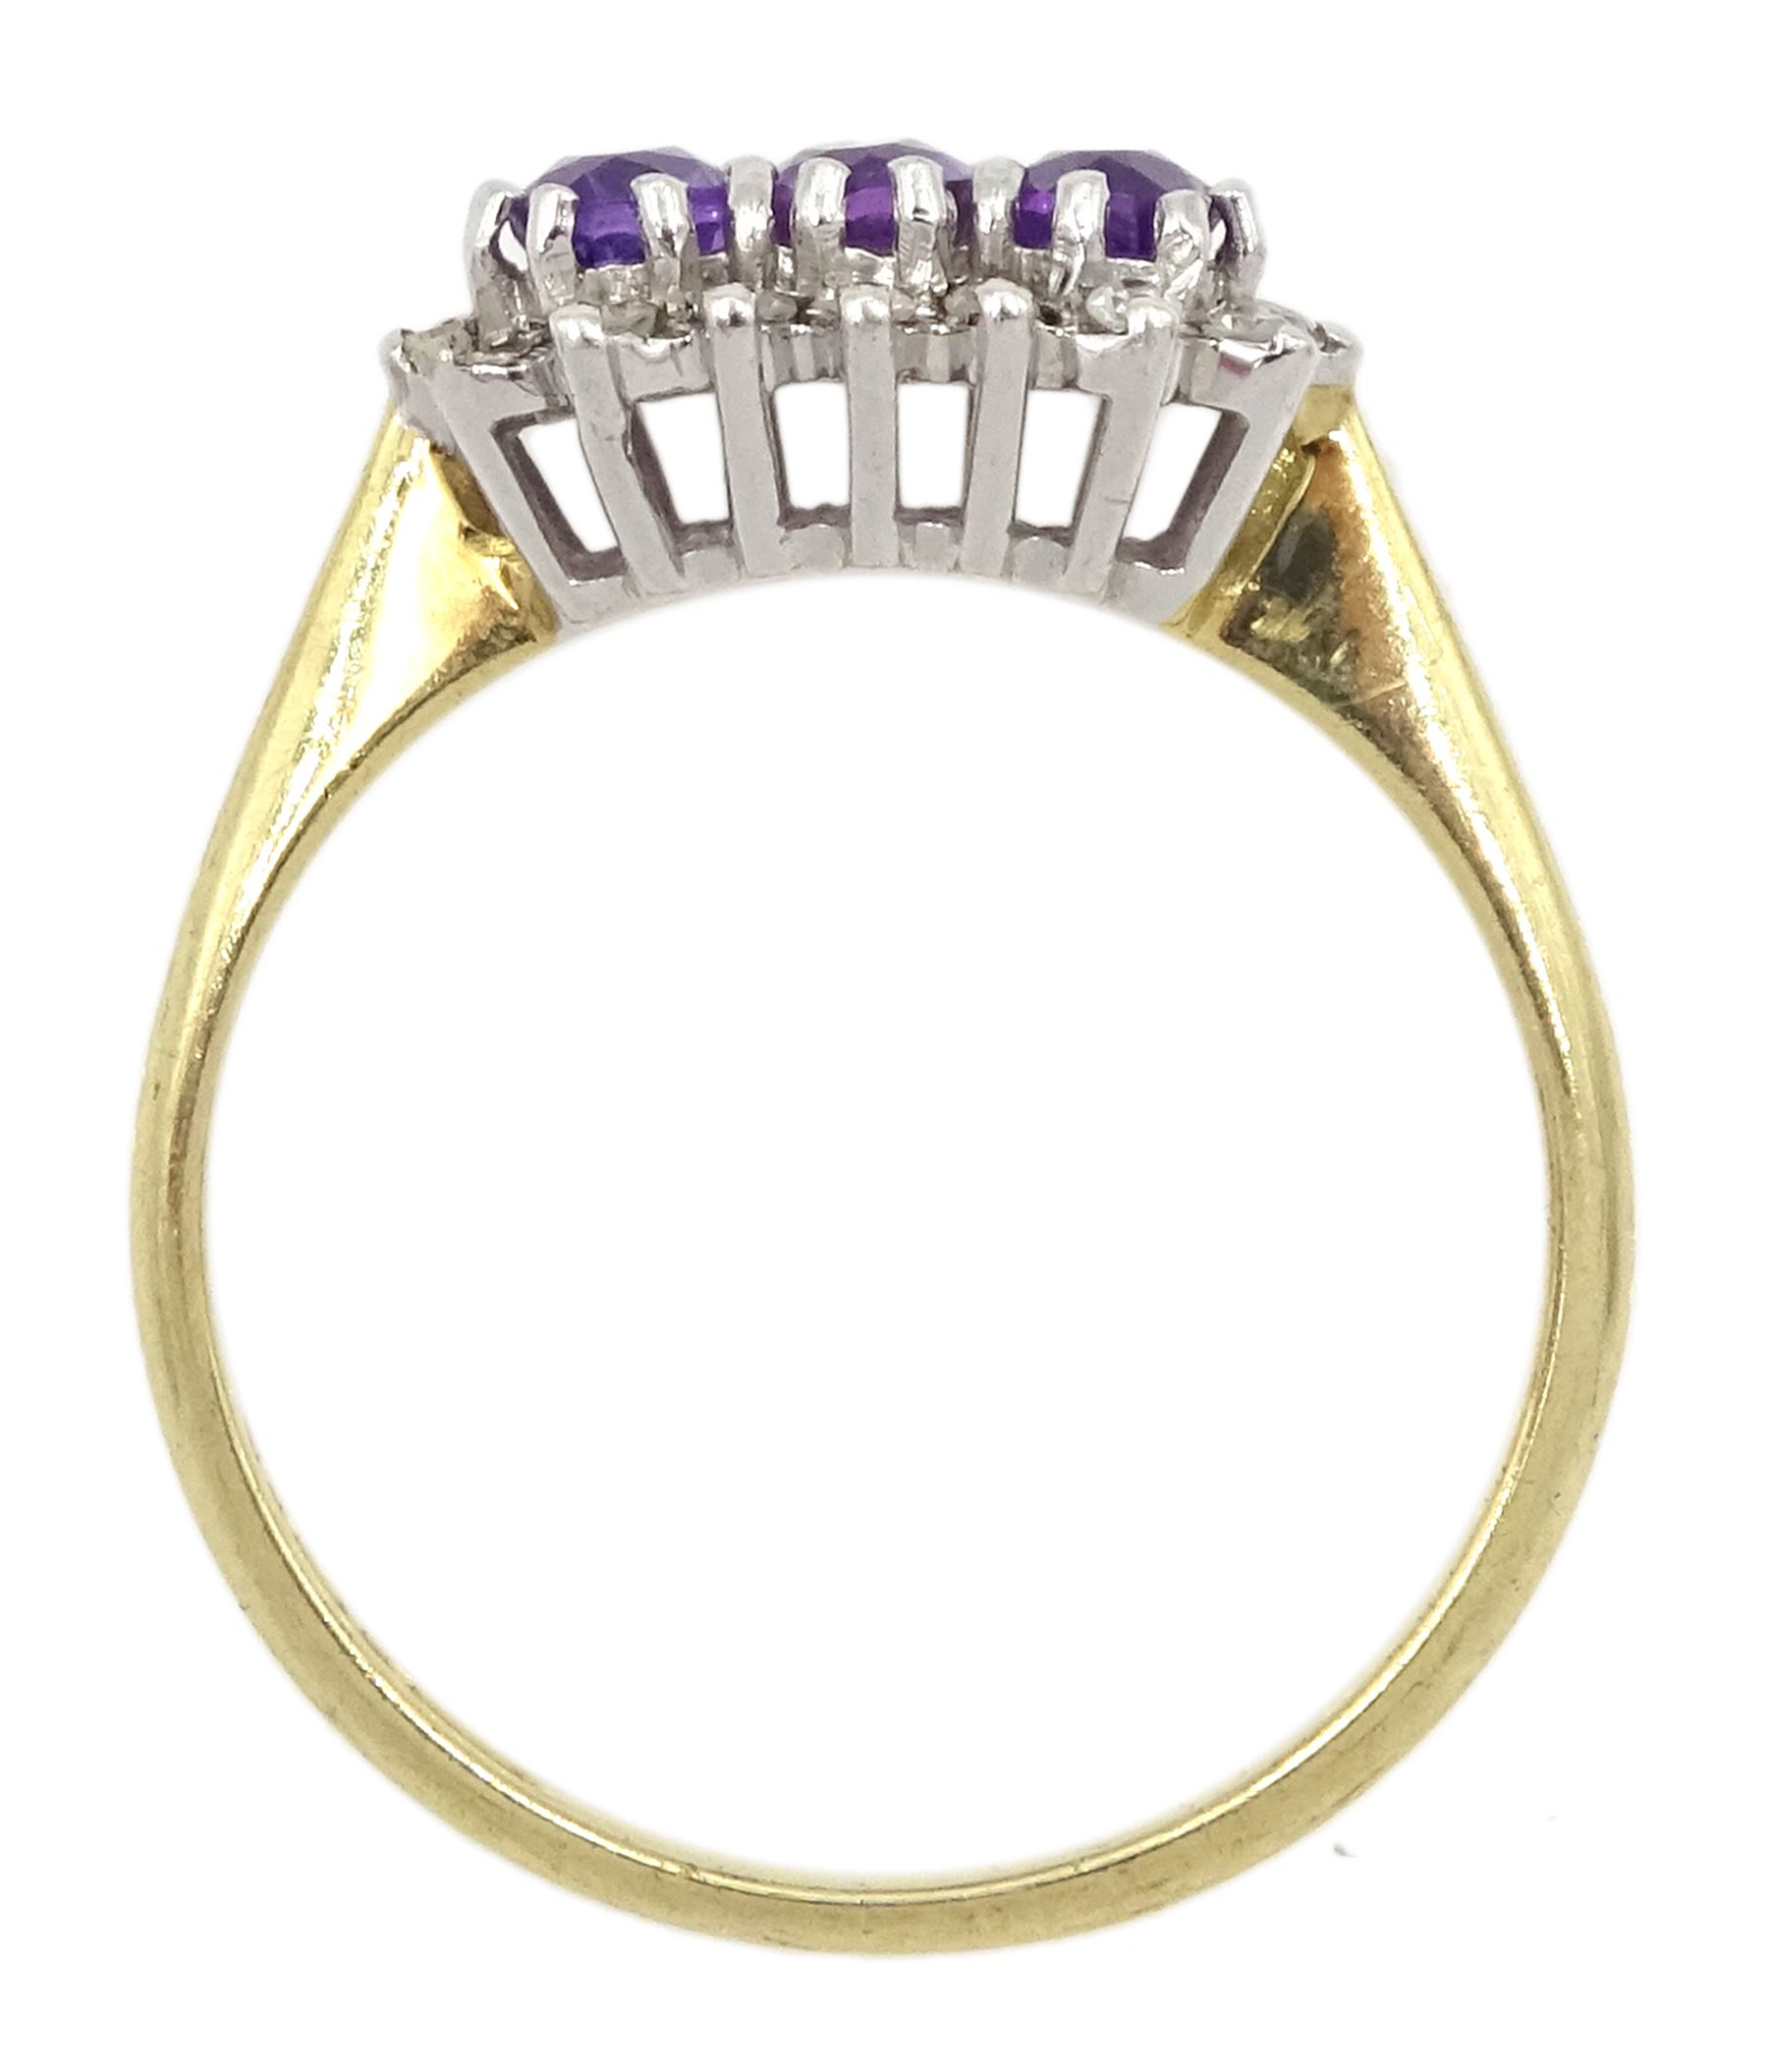 9ct gold amethyst and diamond cluster ring - Image 4 of 4